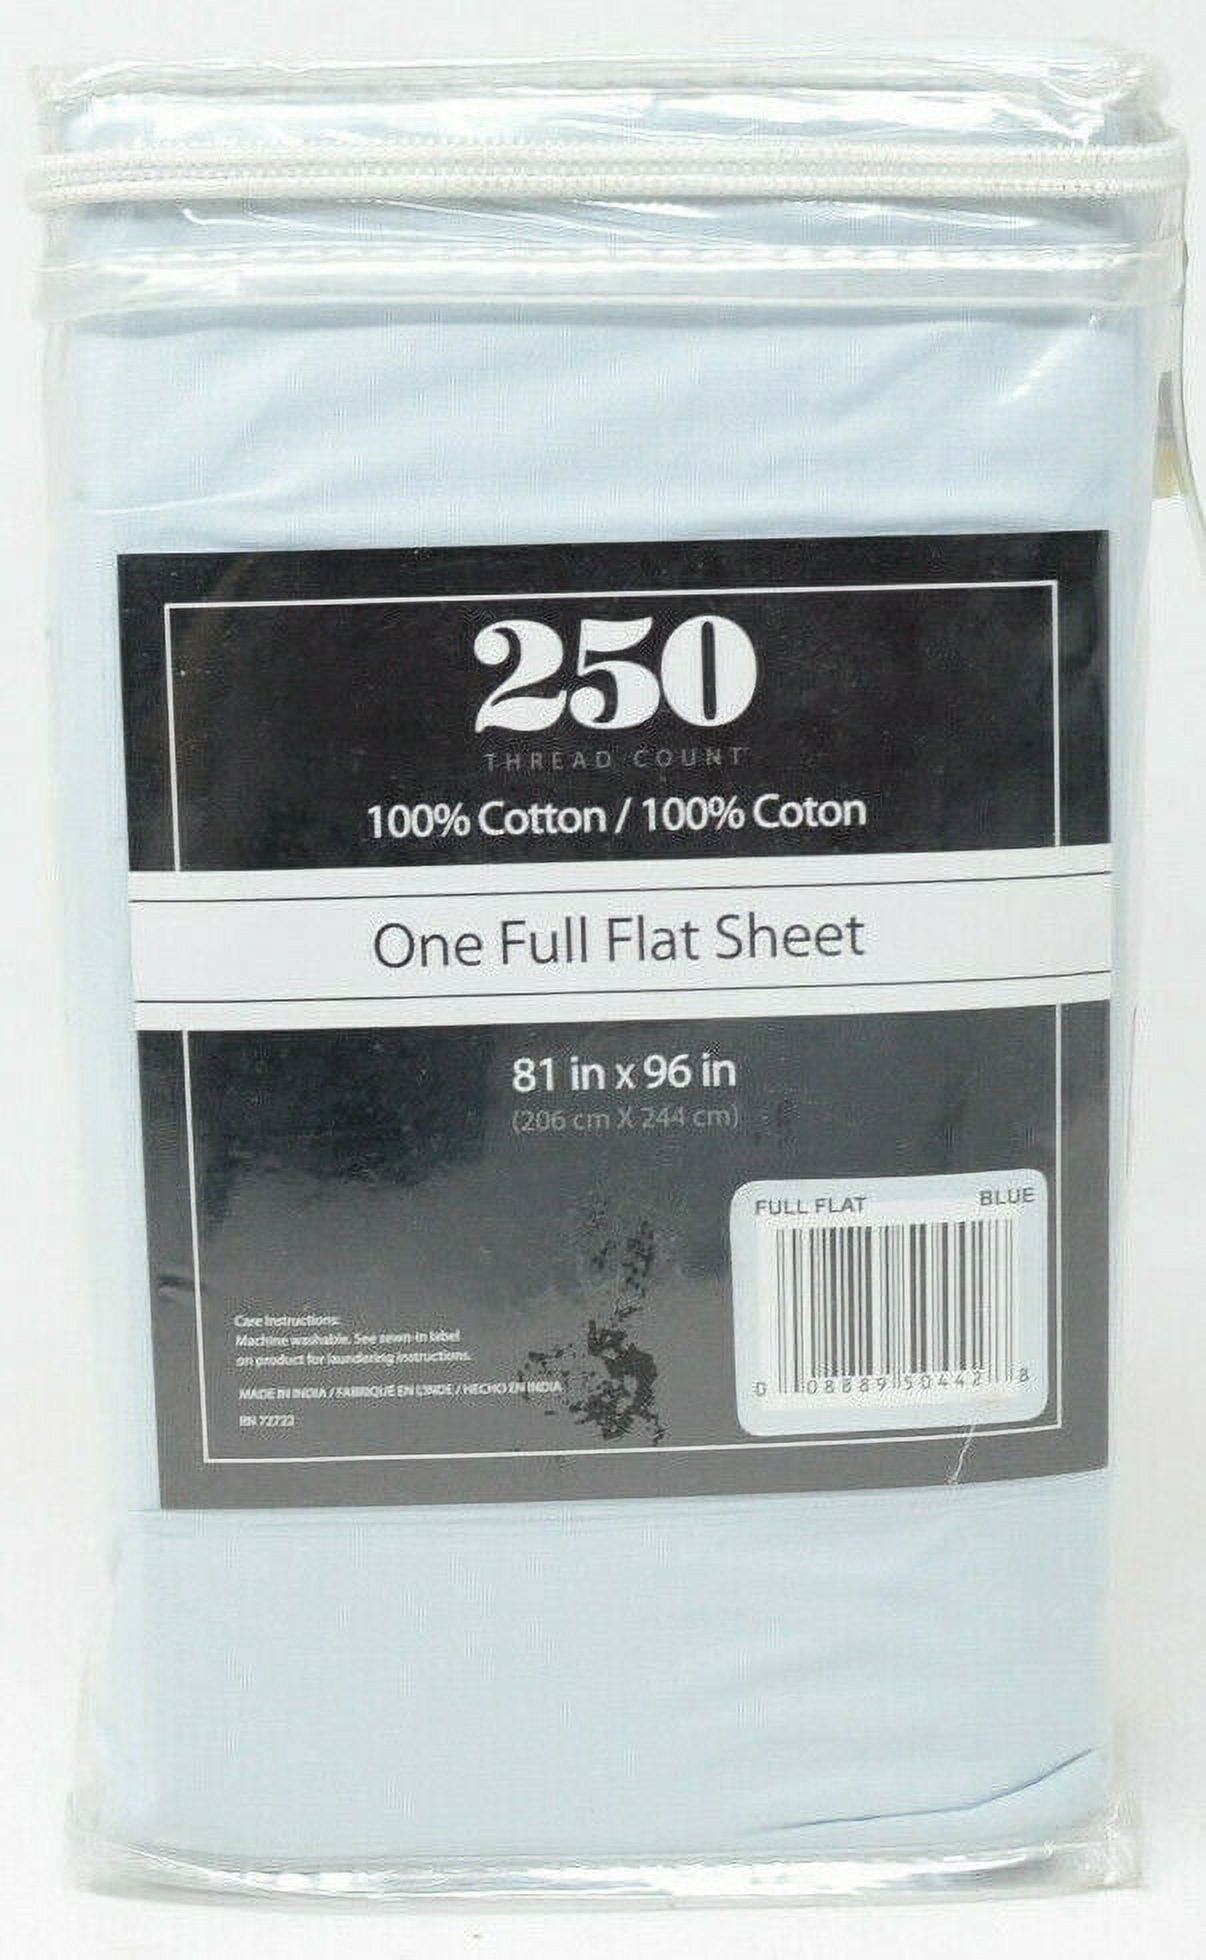 250 Thread Count Luxury FULL Flat Sheet in BLUE - image 2 of 2